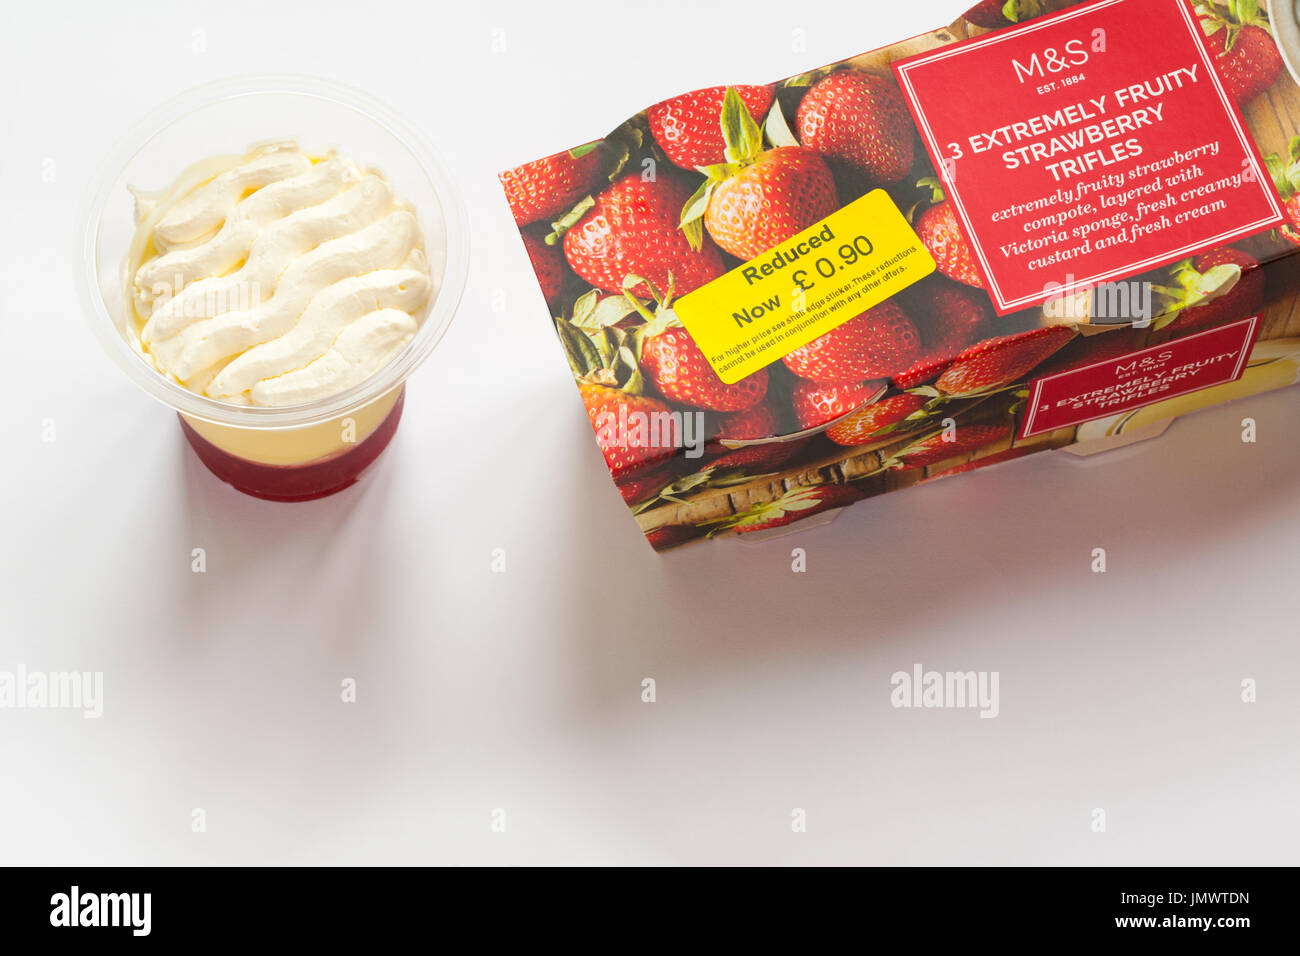 pack of M&S 3 extremely fruity strawberry trifles with one removed set on white background Stock Photo